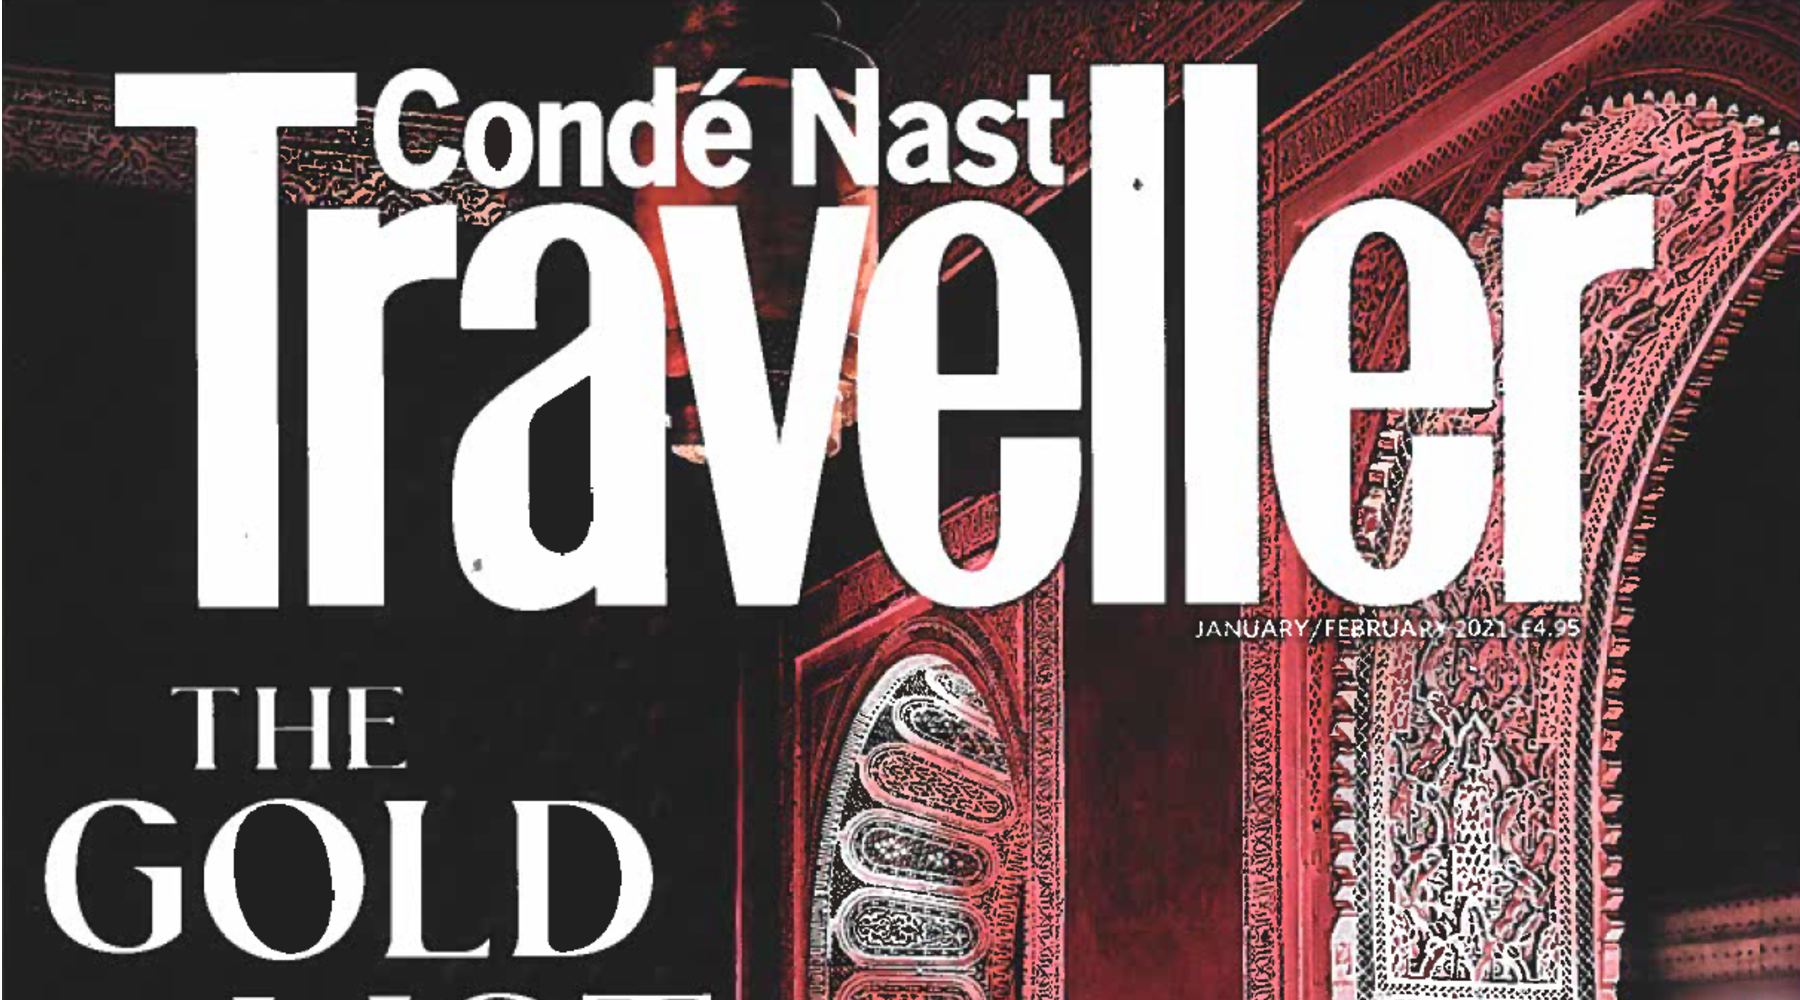 1st Jan | The Luxury Gift Guide - January/February 2021 Issue (Condé Nast Traveller)